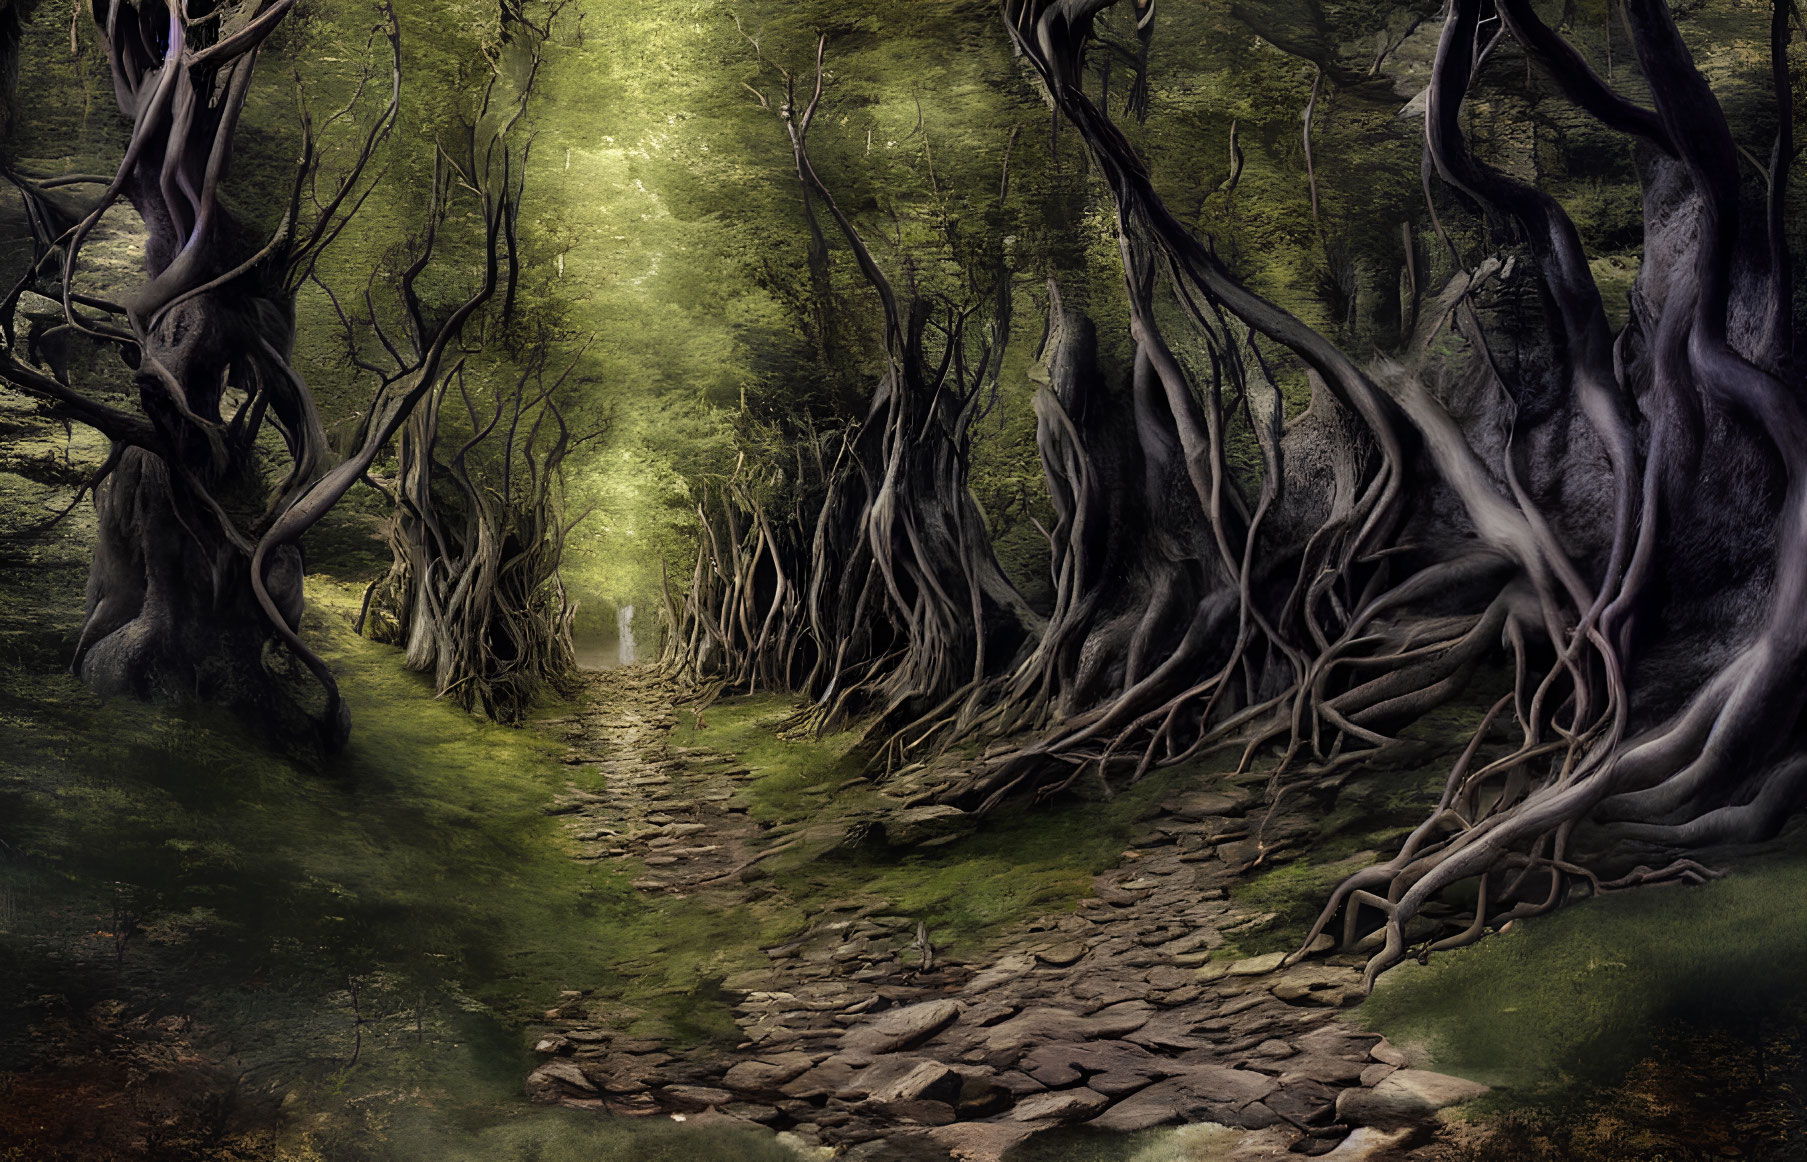 Ancient forest path with gnarled trees and dappled light.